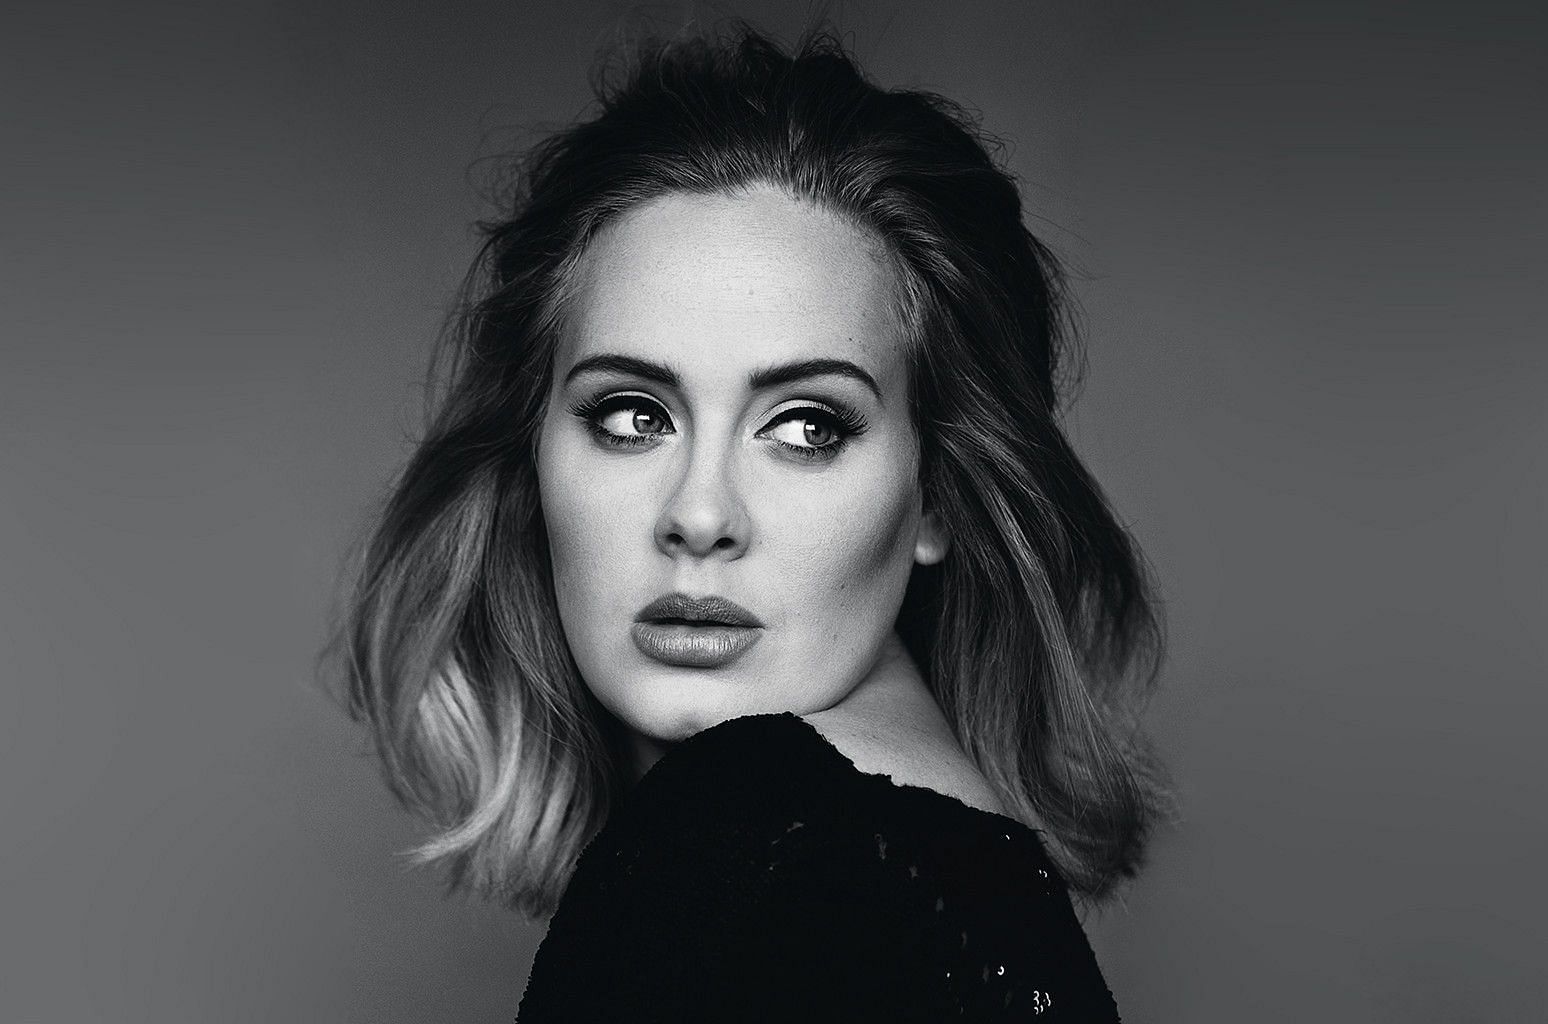 Adele parted ways with her husband in 2019 and their divorce was finalized this year (Image via Getty Images)